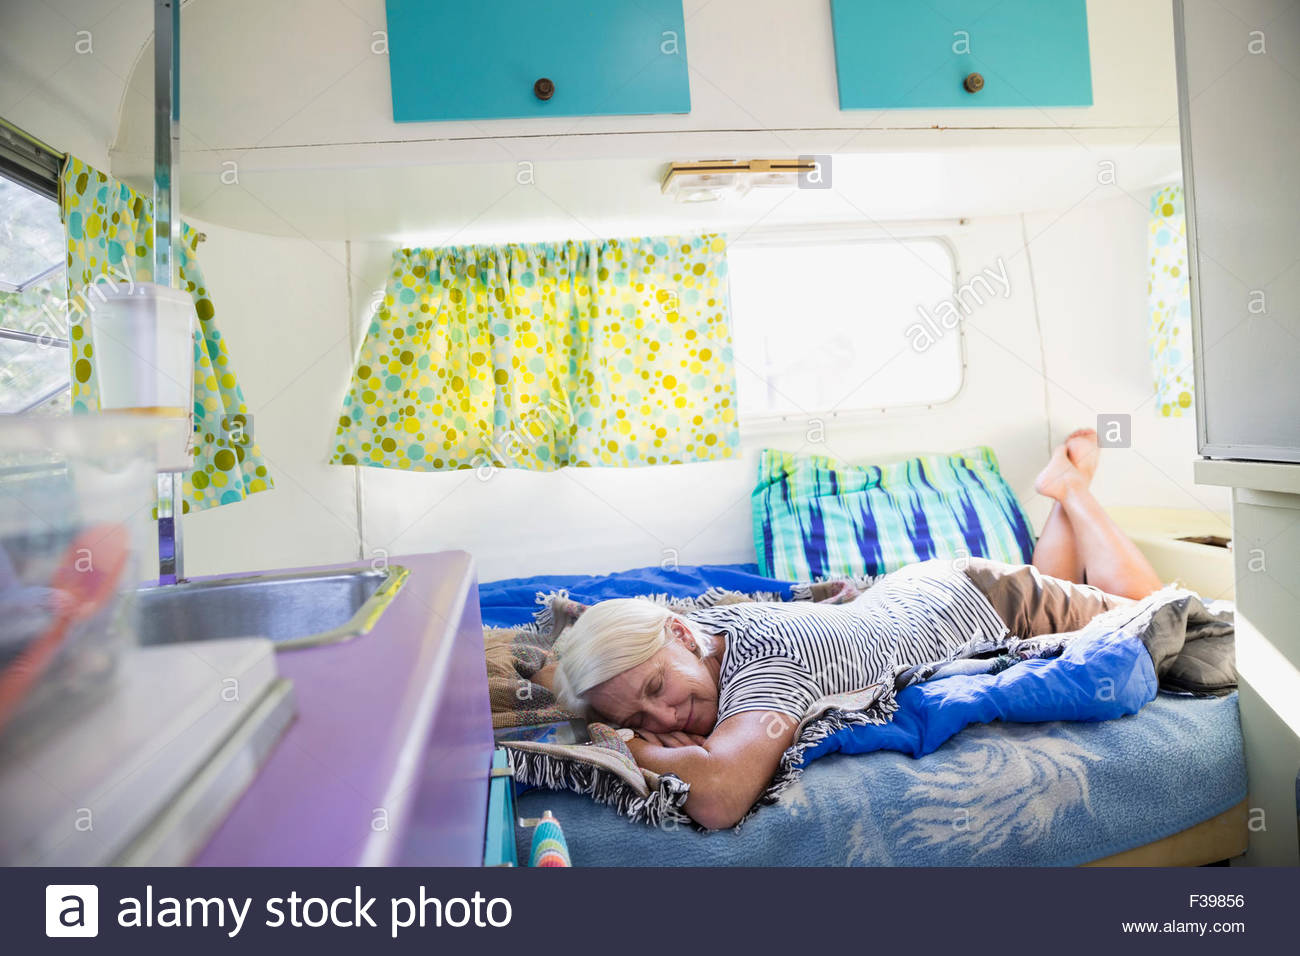 Senior woman napping on bed in camper trailer Stock Photo